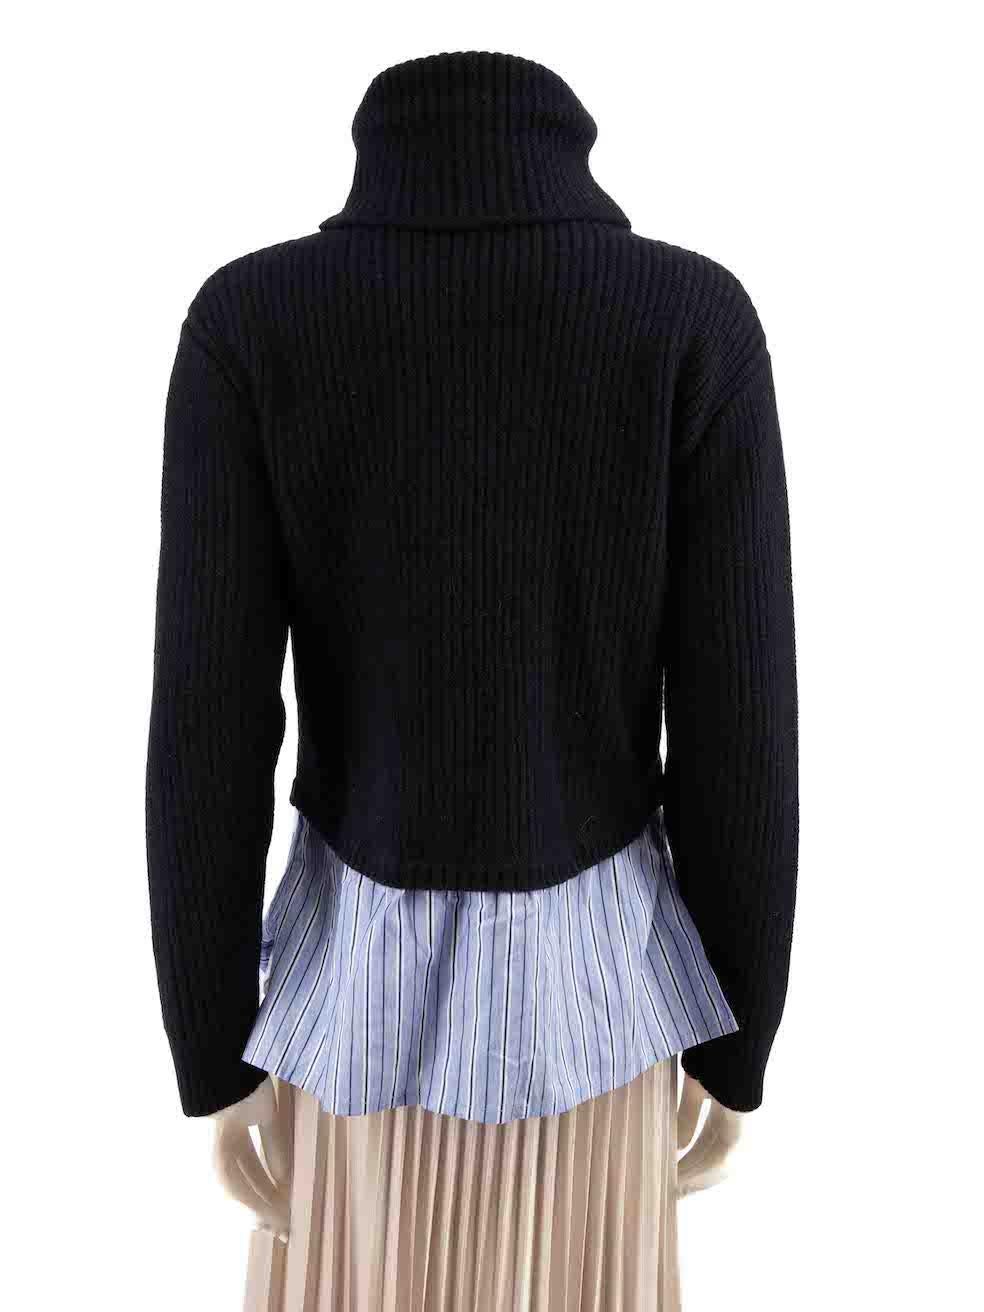 Sandro Navy Knitted Layered Jumper Size S In Good Condition For Sale In London, GB